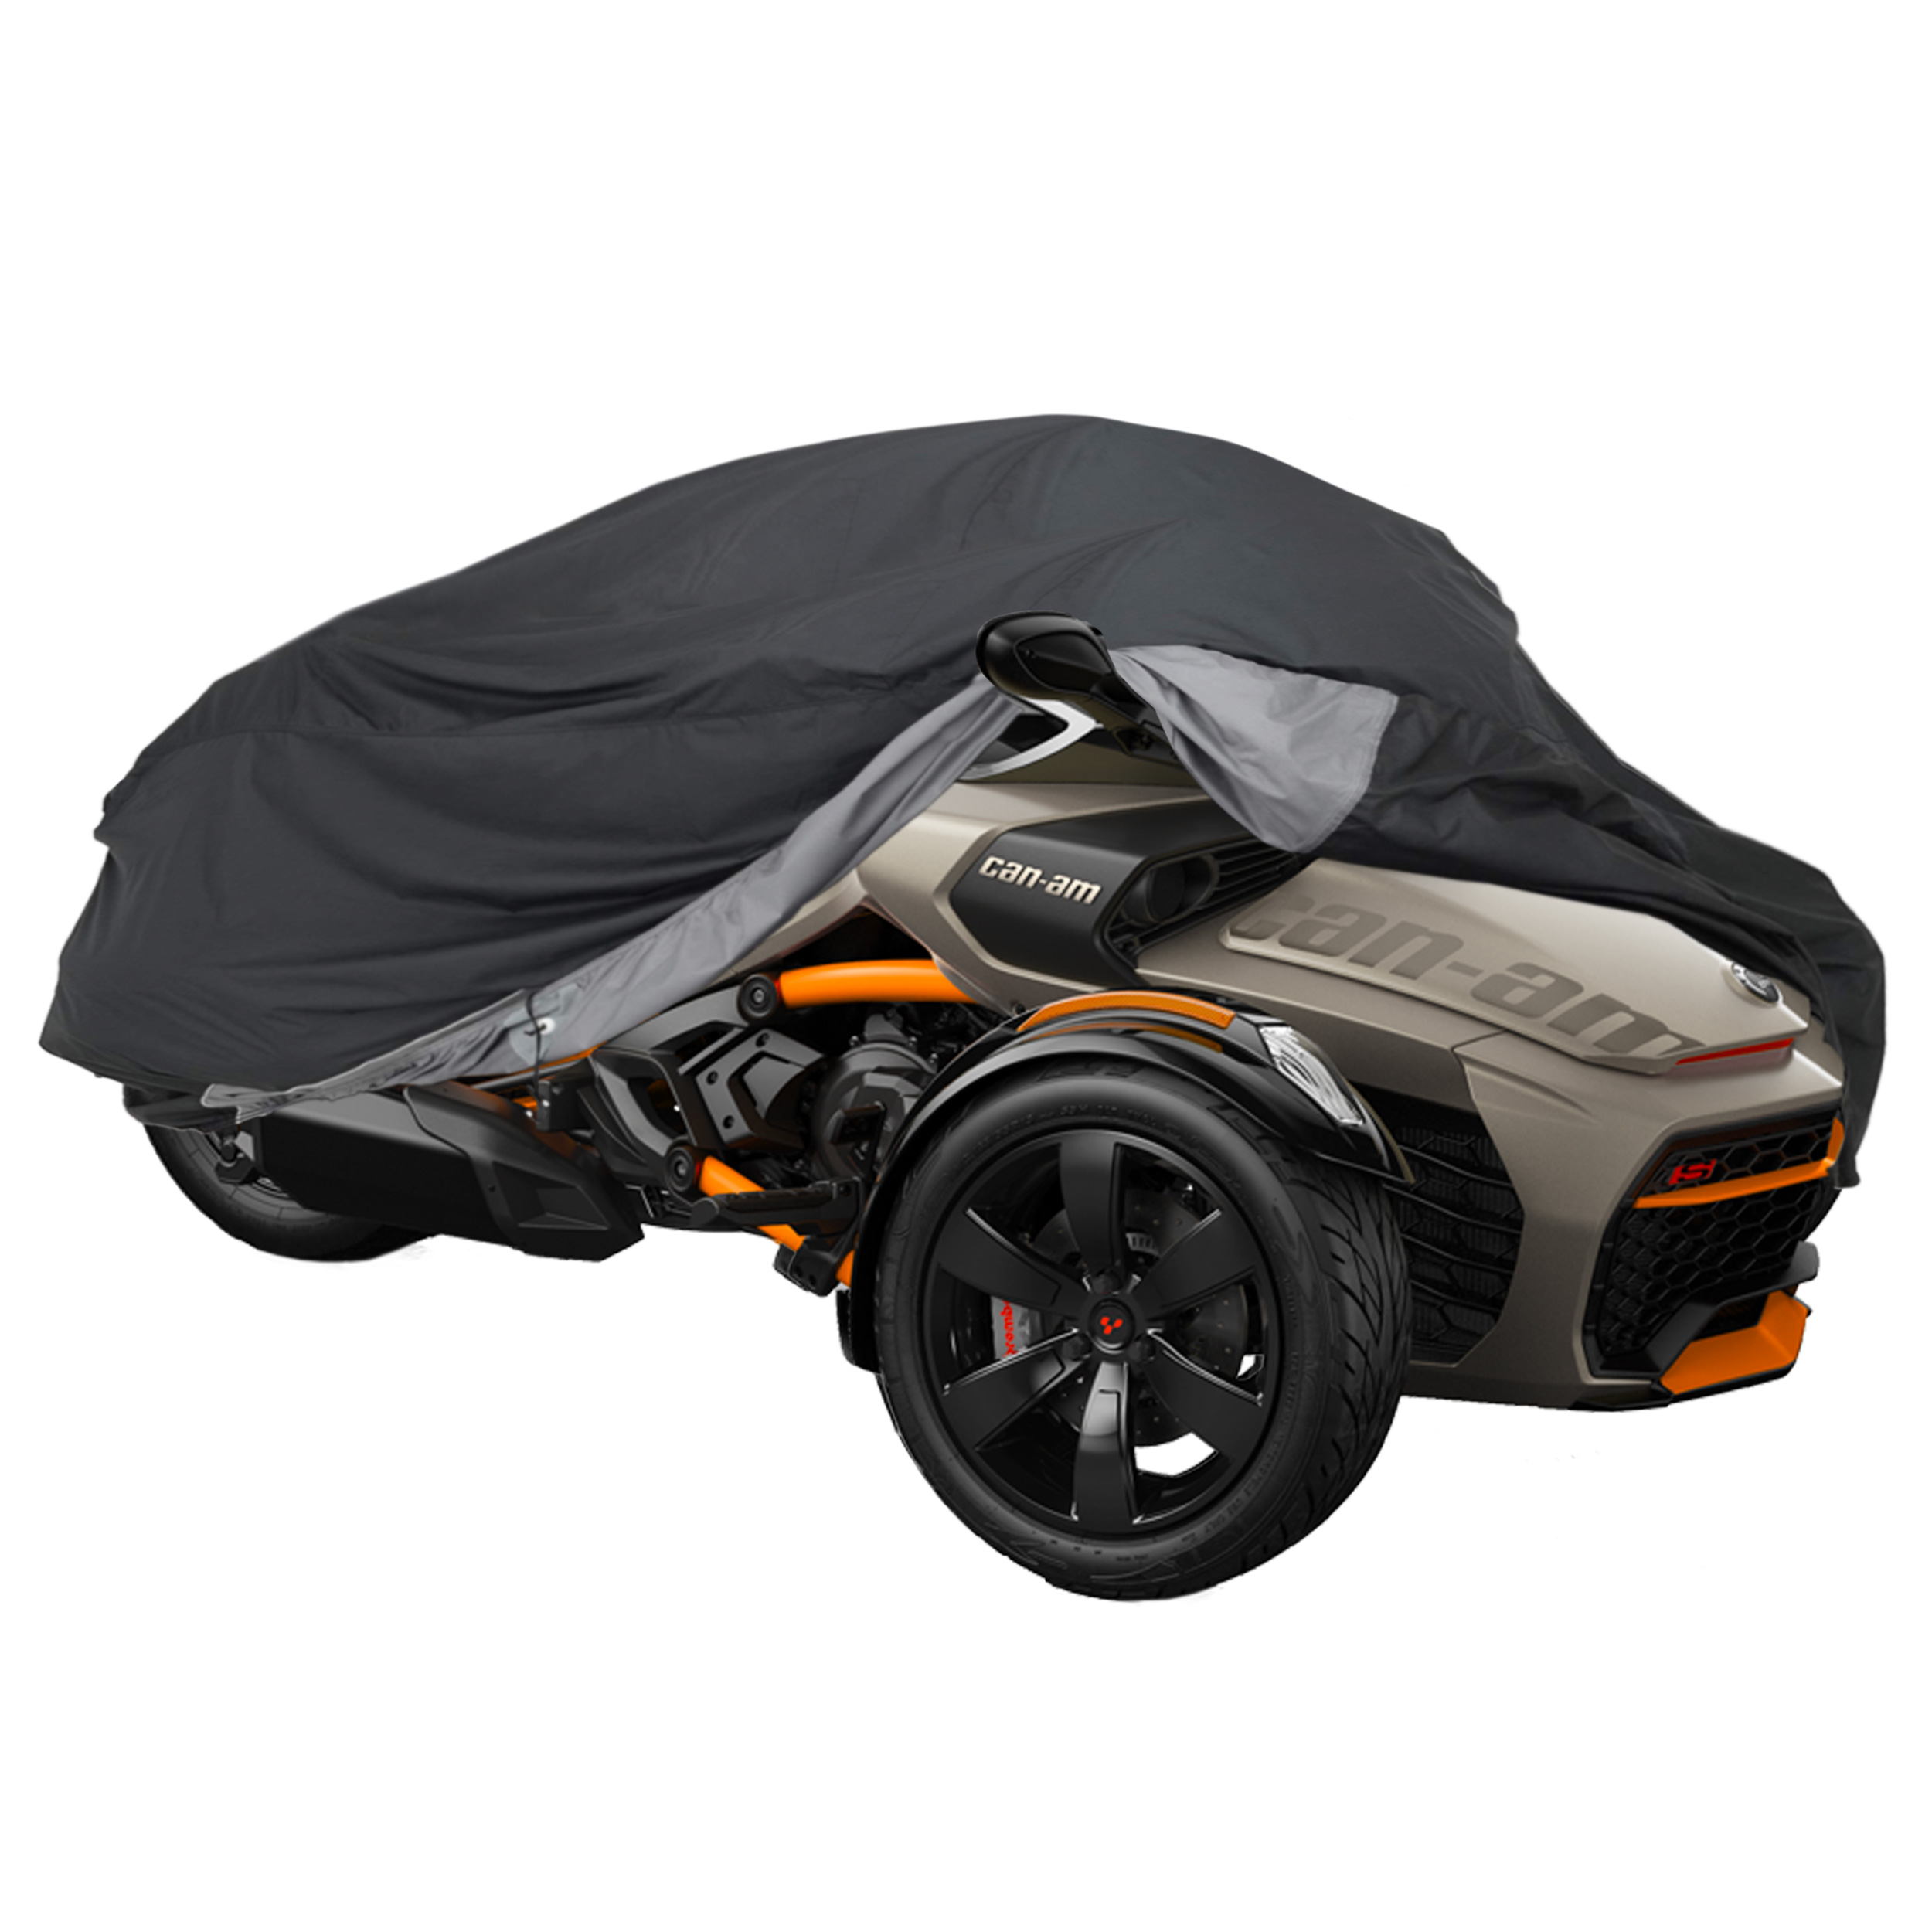 North East Harbor Full Cover Compatible with Can-Am Spyder 2014-2022 F3-S Models (Without Trunk) | Waterproof, Weather Resistant Fabric, Black